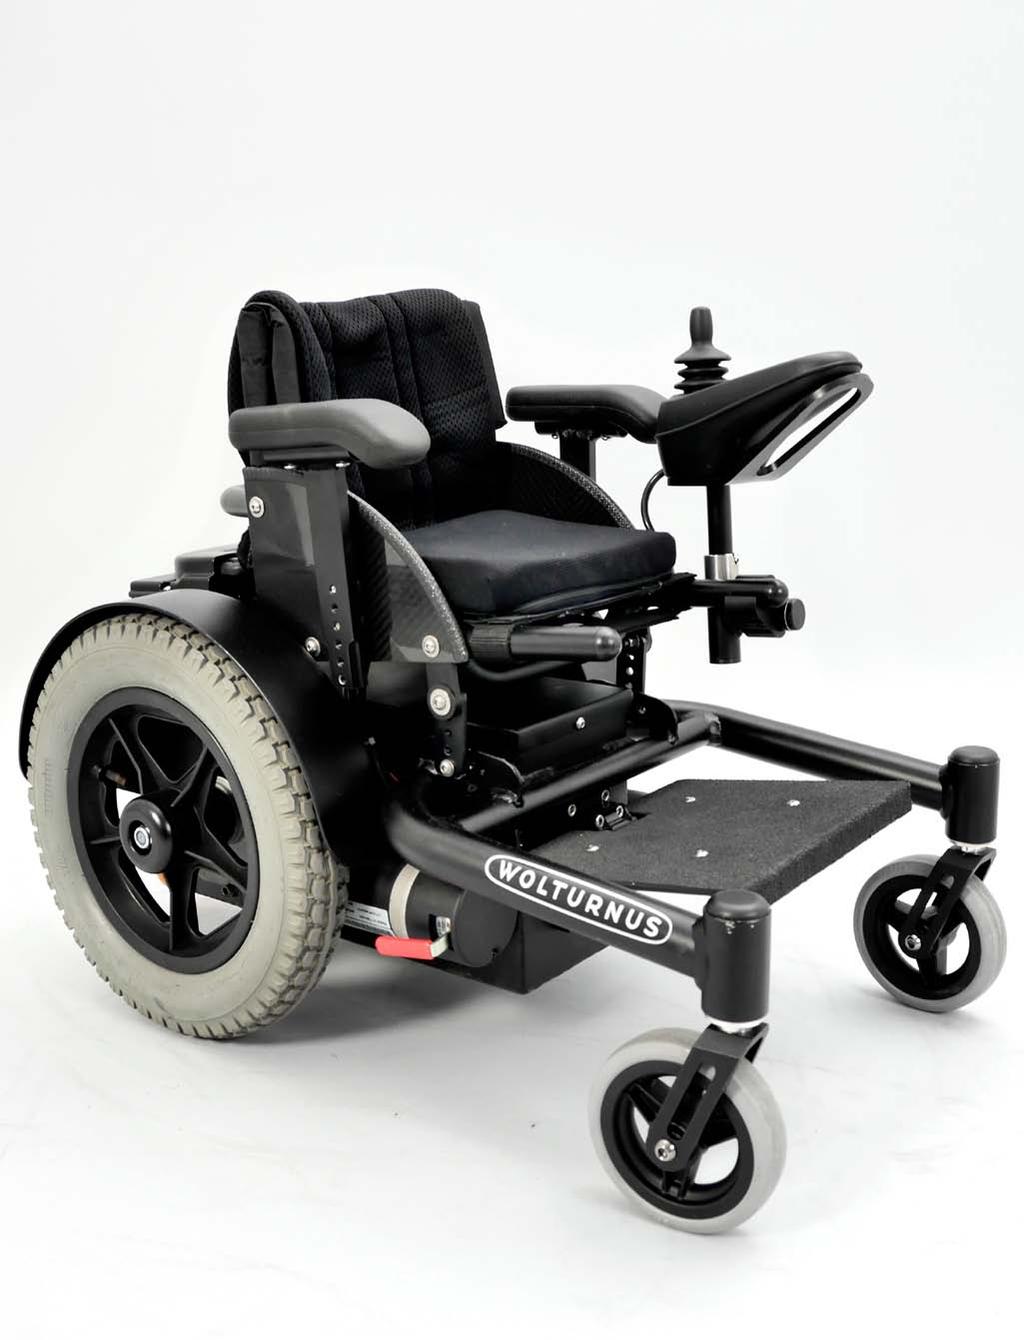 POWER Wheelchair Rex 300 Small and light all-rounder This power wheelchair is available in a seat width from 20 cm. The Rex 300 is very light and has a range of 20 km.